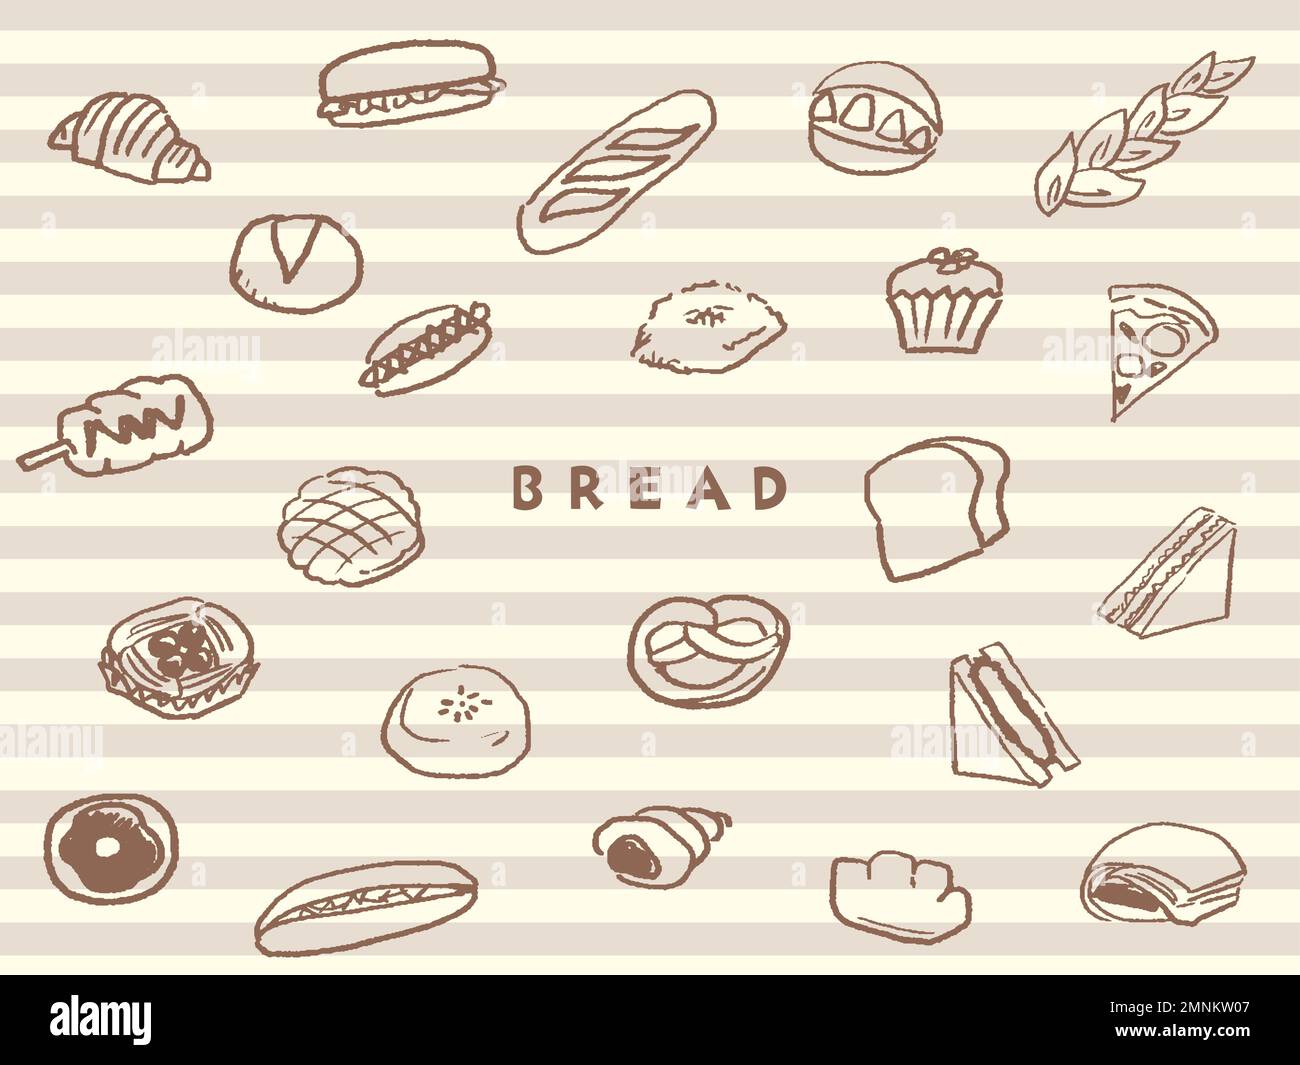 Hand-drawn line drawings of various breads. Striped background.  Illustrations of delicious-looking bread such as bread, visas and sandwiches. Stock Vector